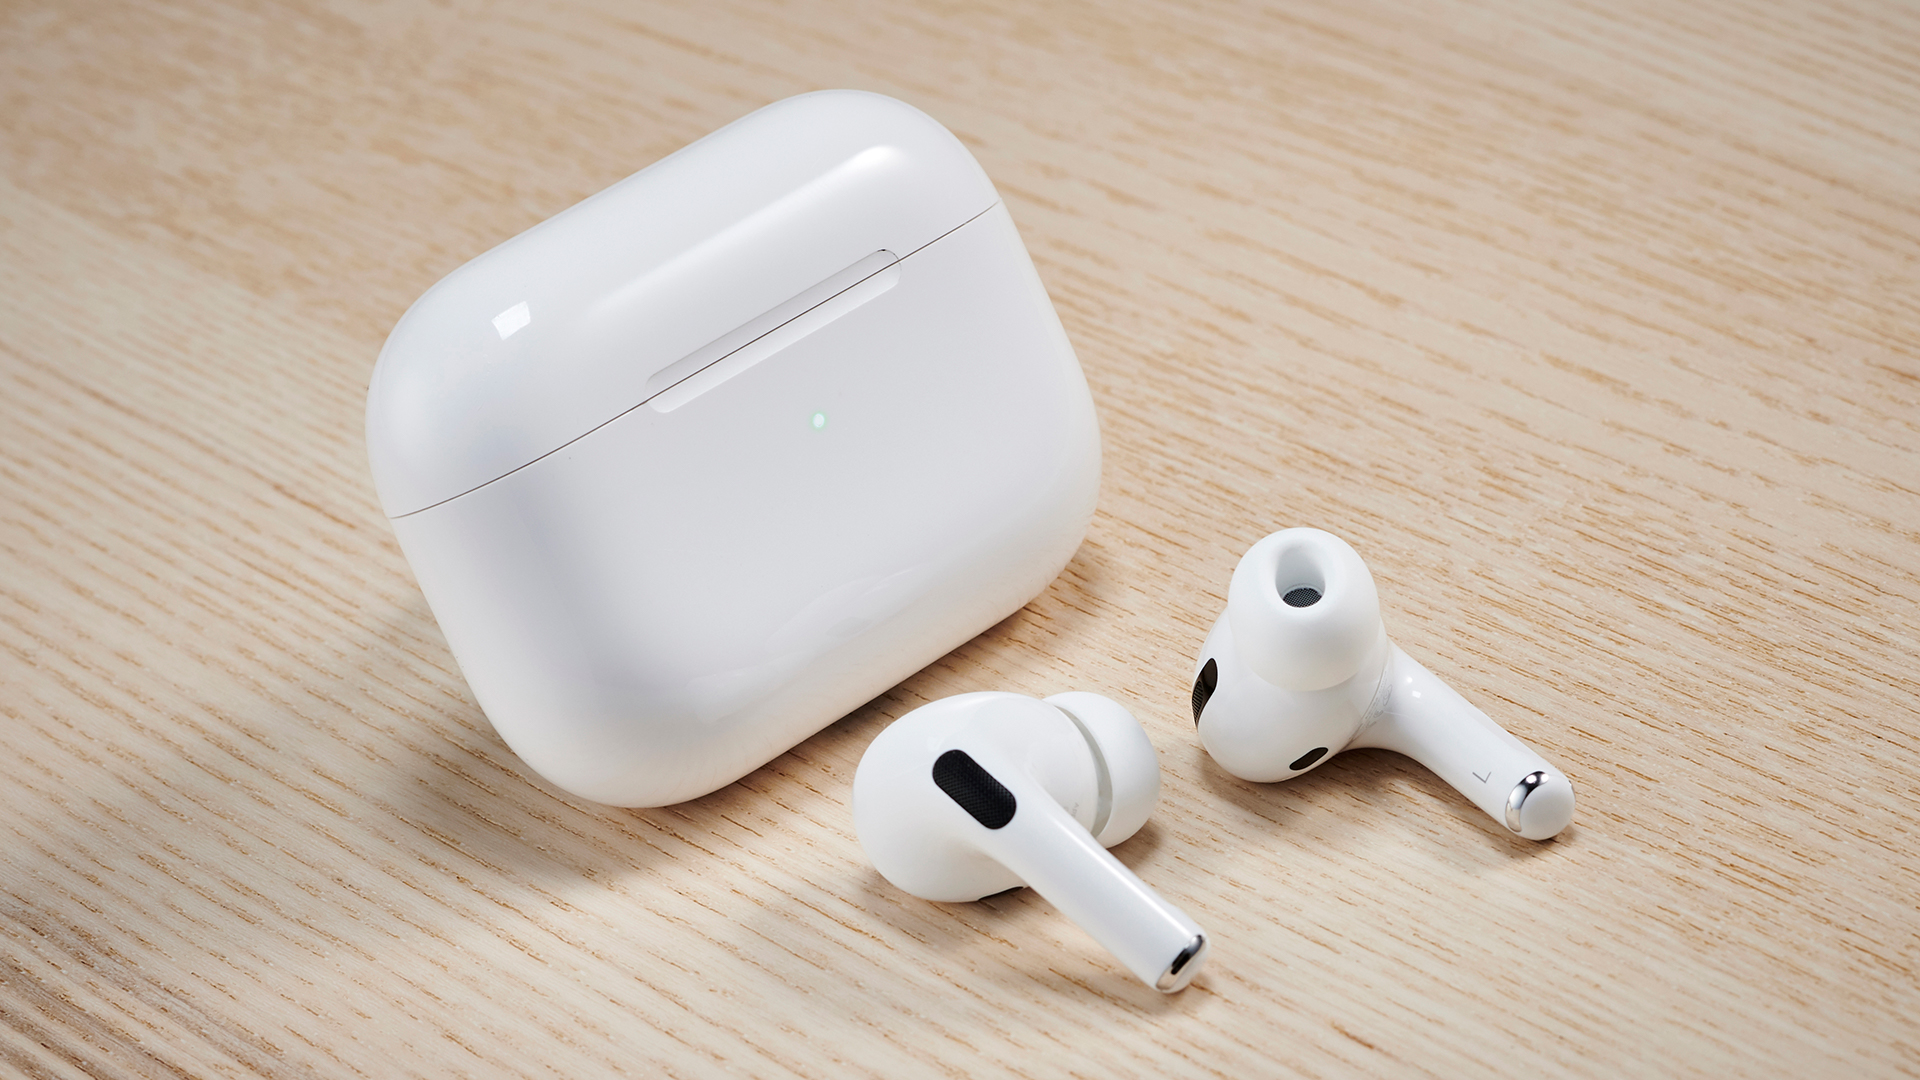 gele I tide Hurtig Apple AirPods Pro review: clever earbuds with great sound | T3